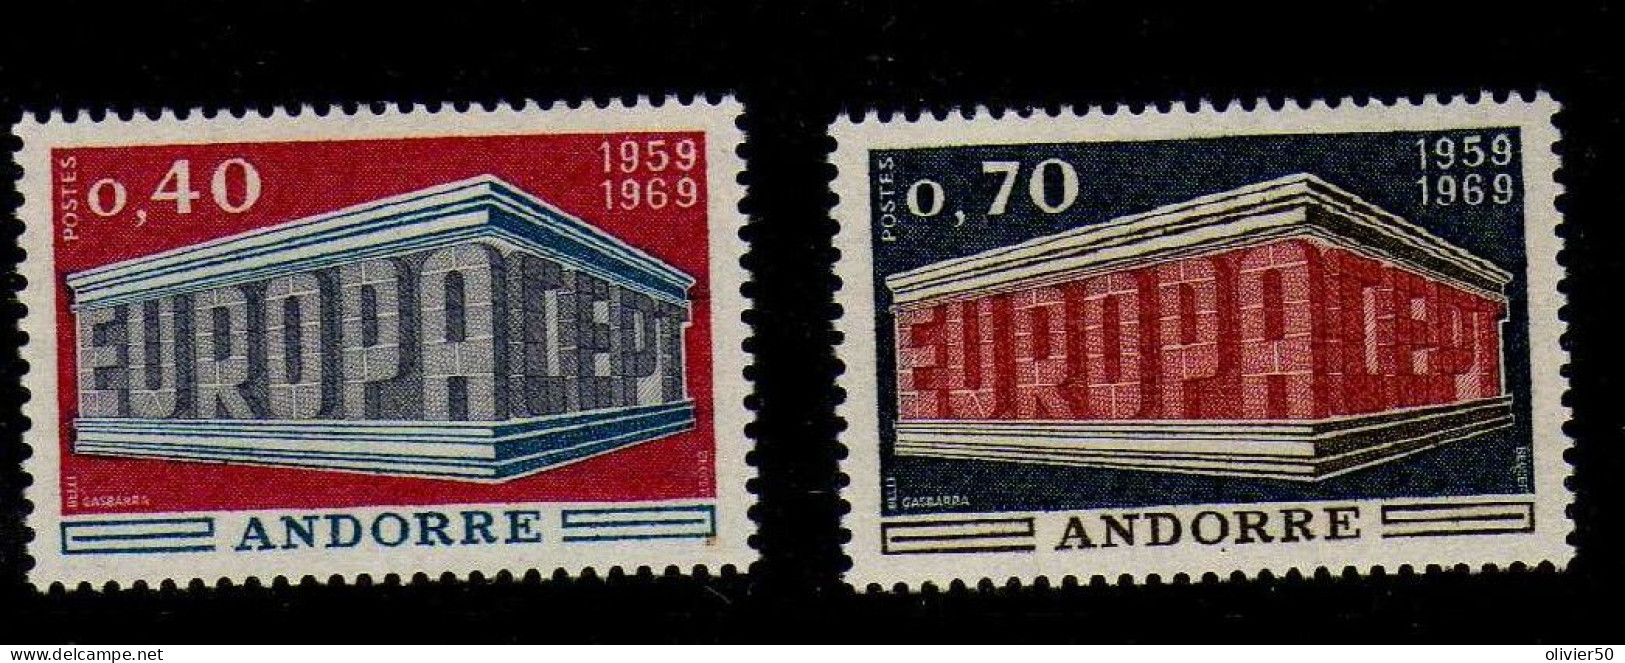 Andorre Francaise -  1969 - Europa  -Neufs** - MNH  - - Unused Stamps